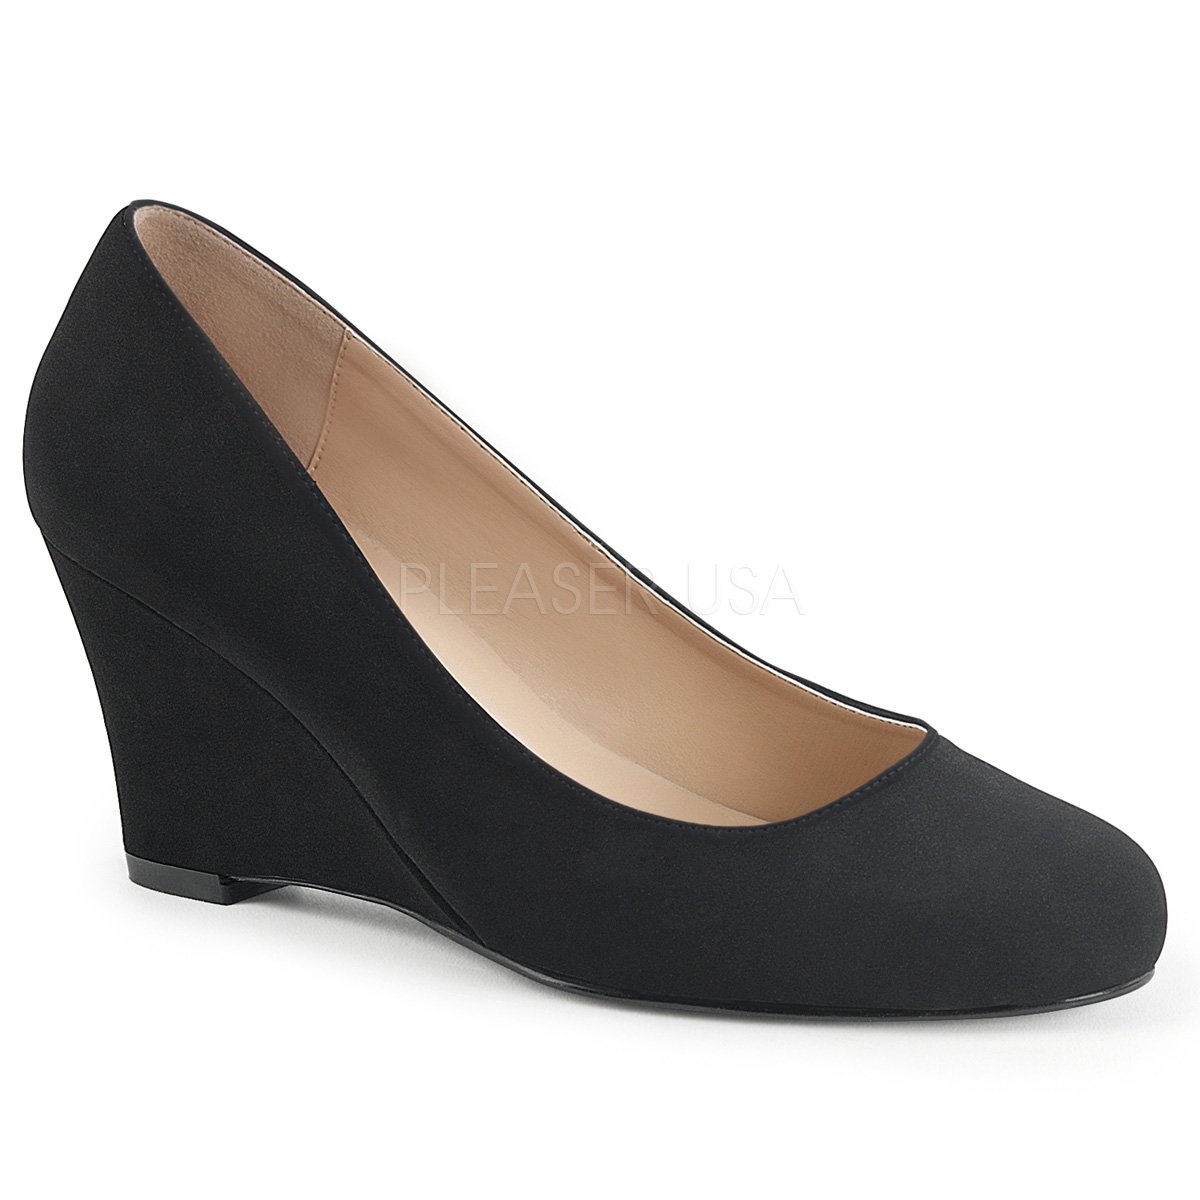 Wedge Black Classic Pump Shoes with 3-inch Heel Suede or Faux Leather ...